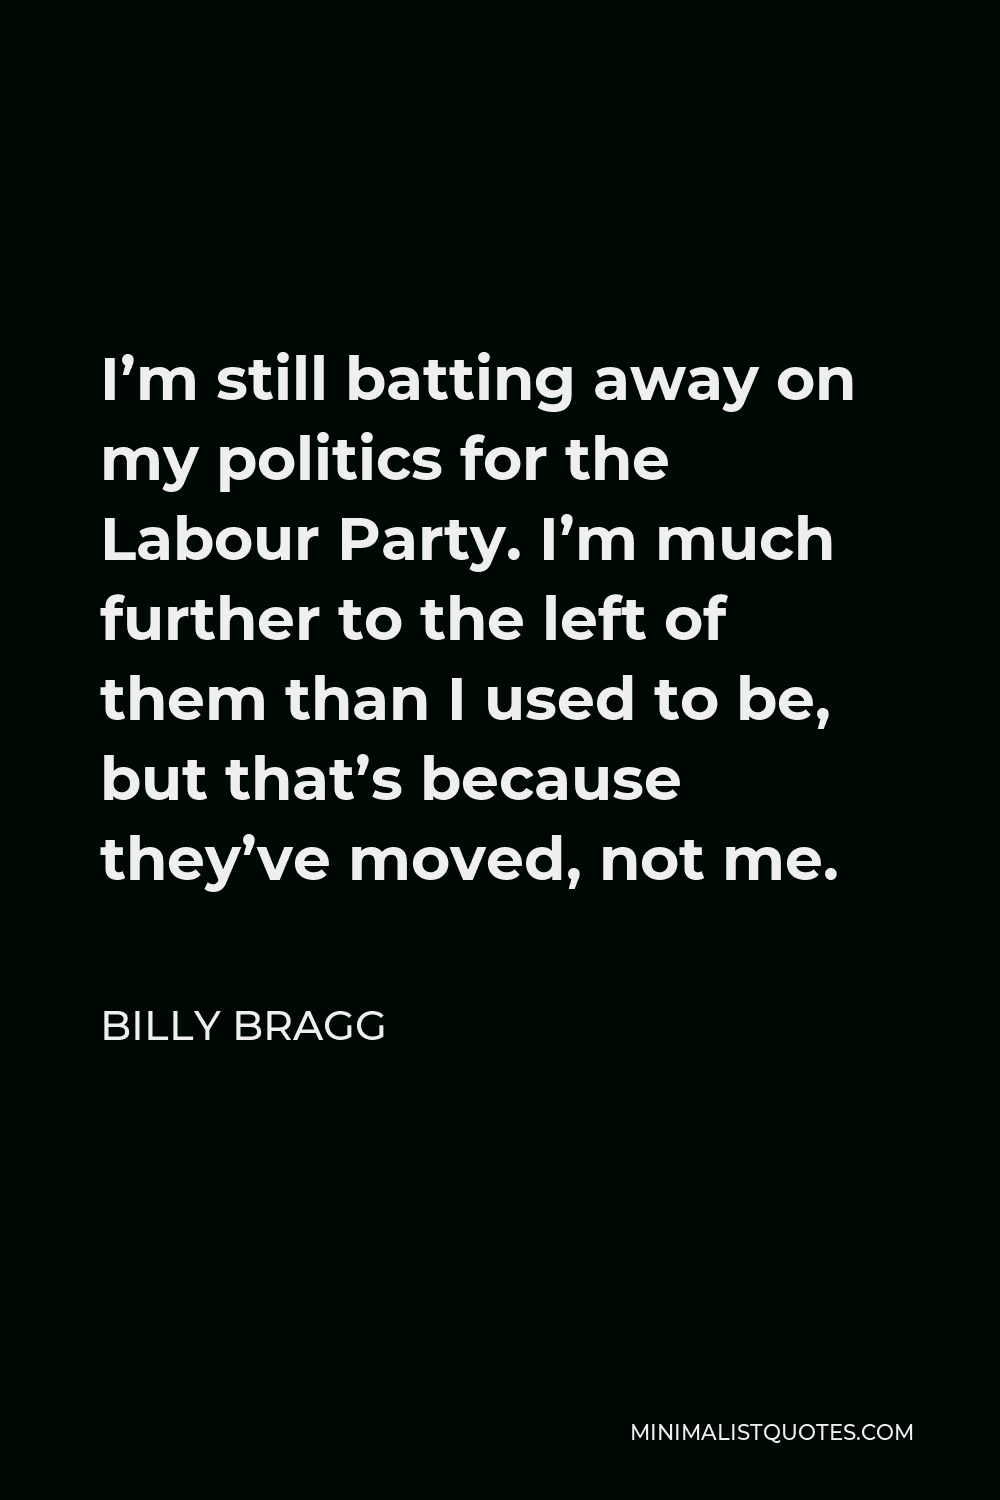 Billy Bragg Quote - I’m still batting away on my politics for the Labour Party. I’m much further to the left of them than I used to be, but that’s because they’ve moved, not me.